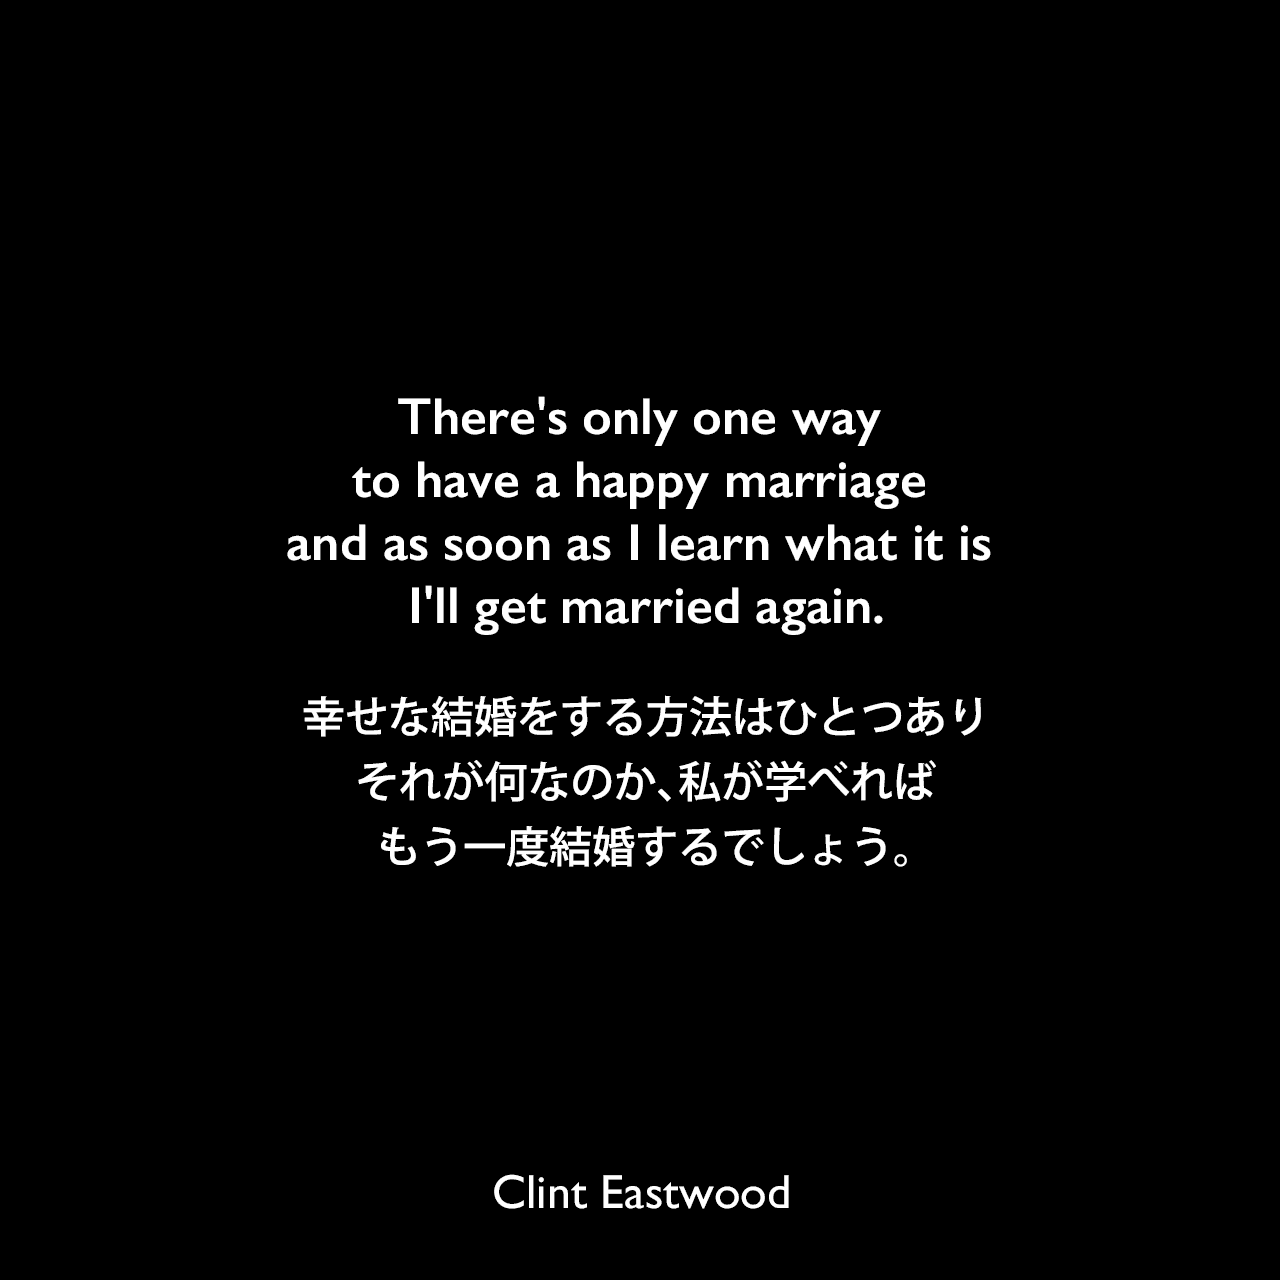 There's only one way to have a happy marriage and as soon as I learn what it is I'll get married again.幸せな結婚をする方法はひとつあり、それが何なのか、私が学べればもう一度結婚するでしょう。Clint Eastwood